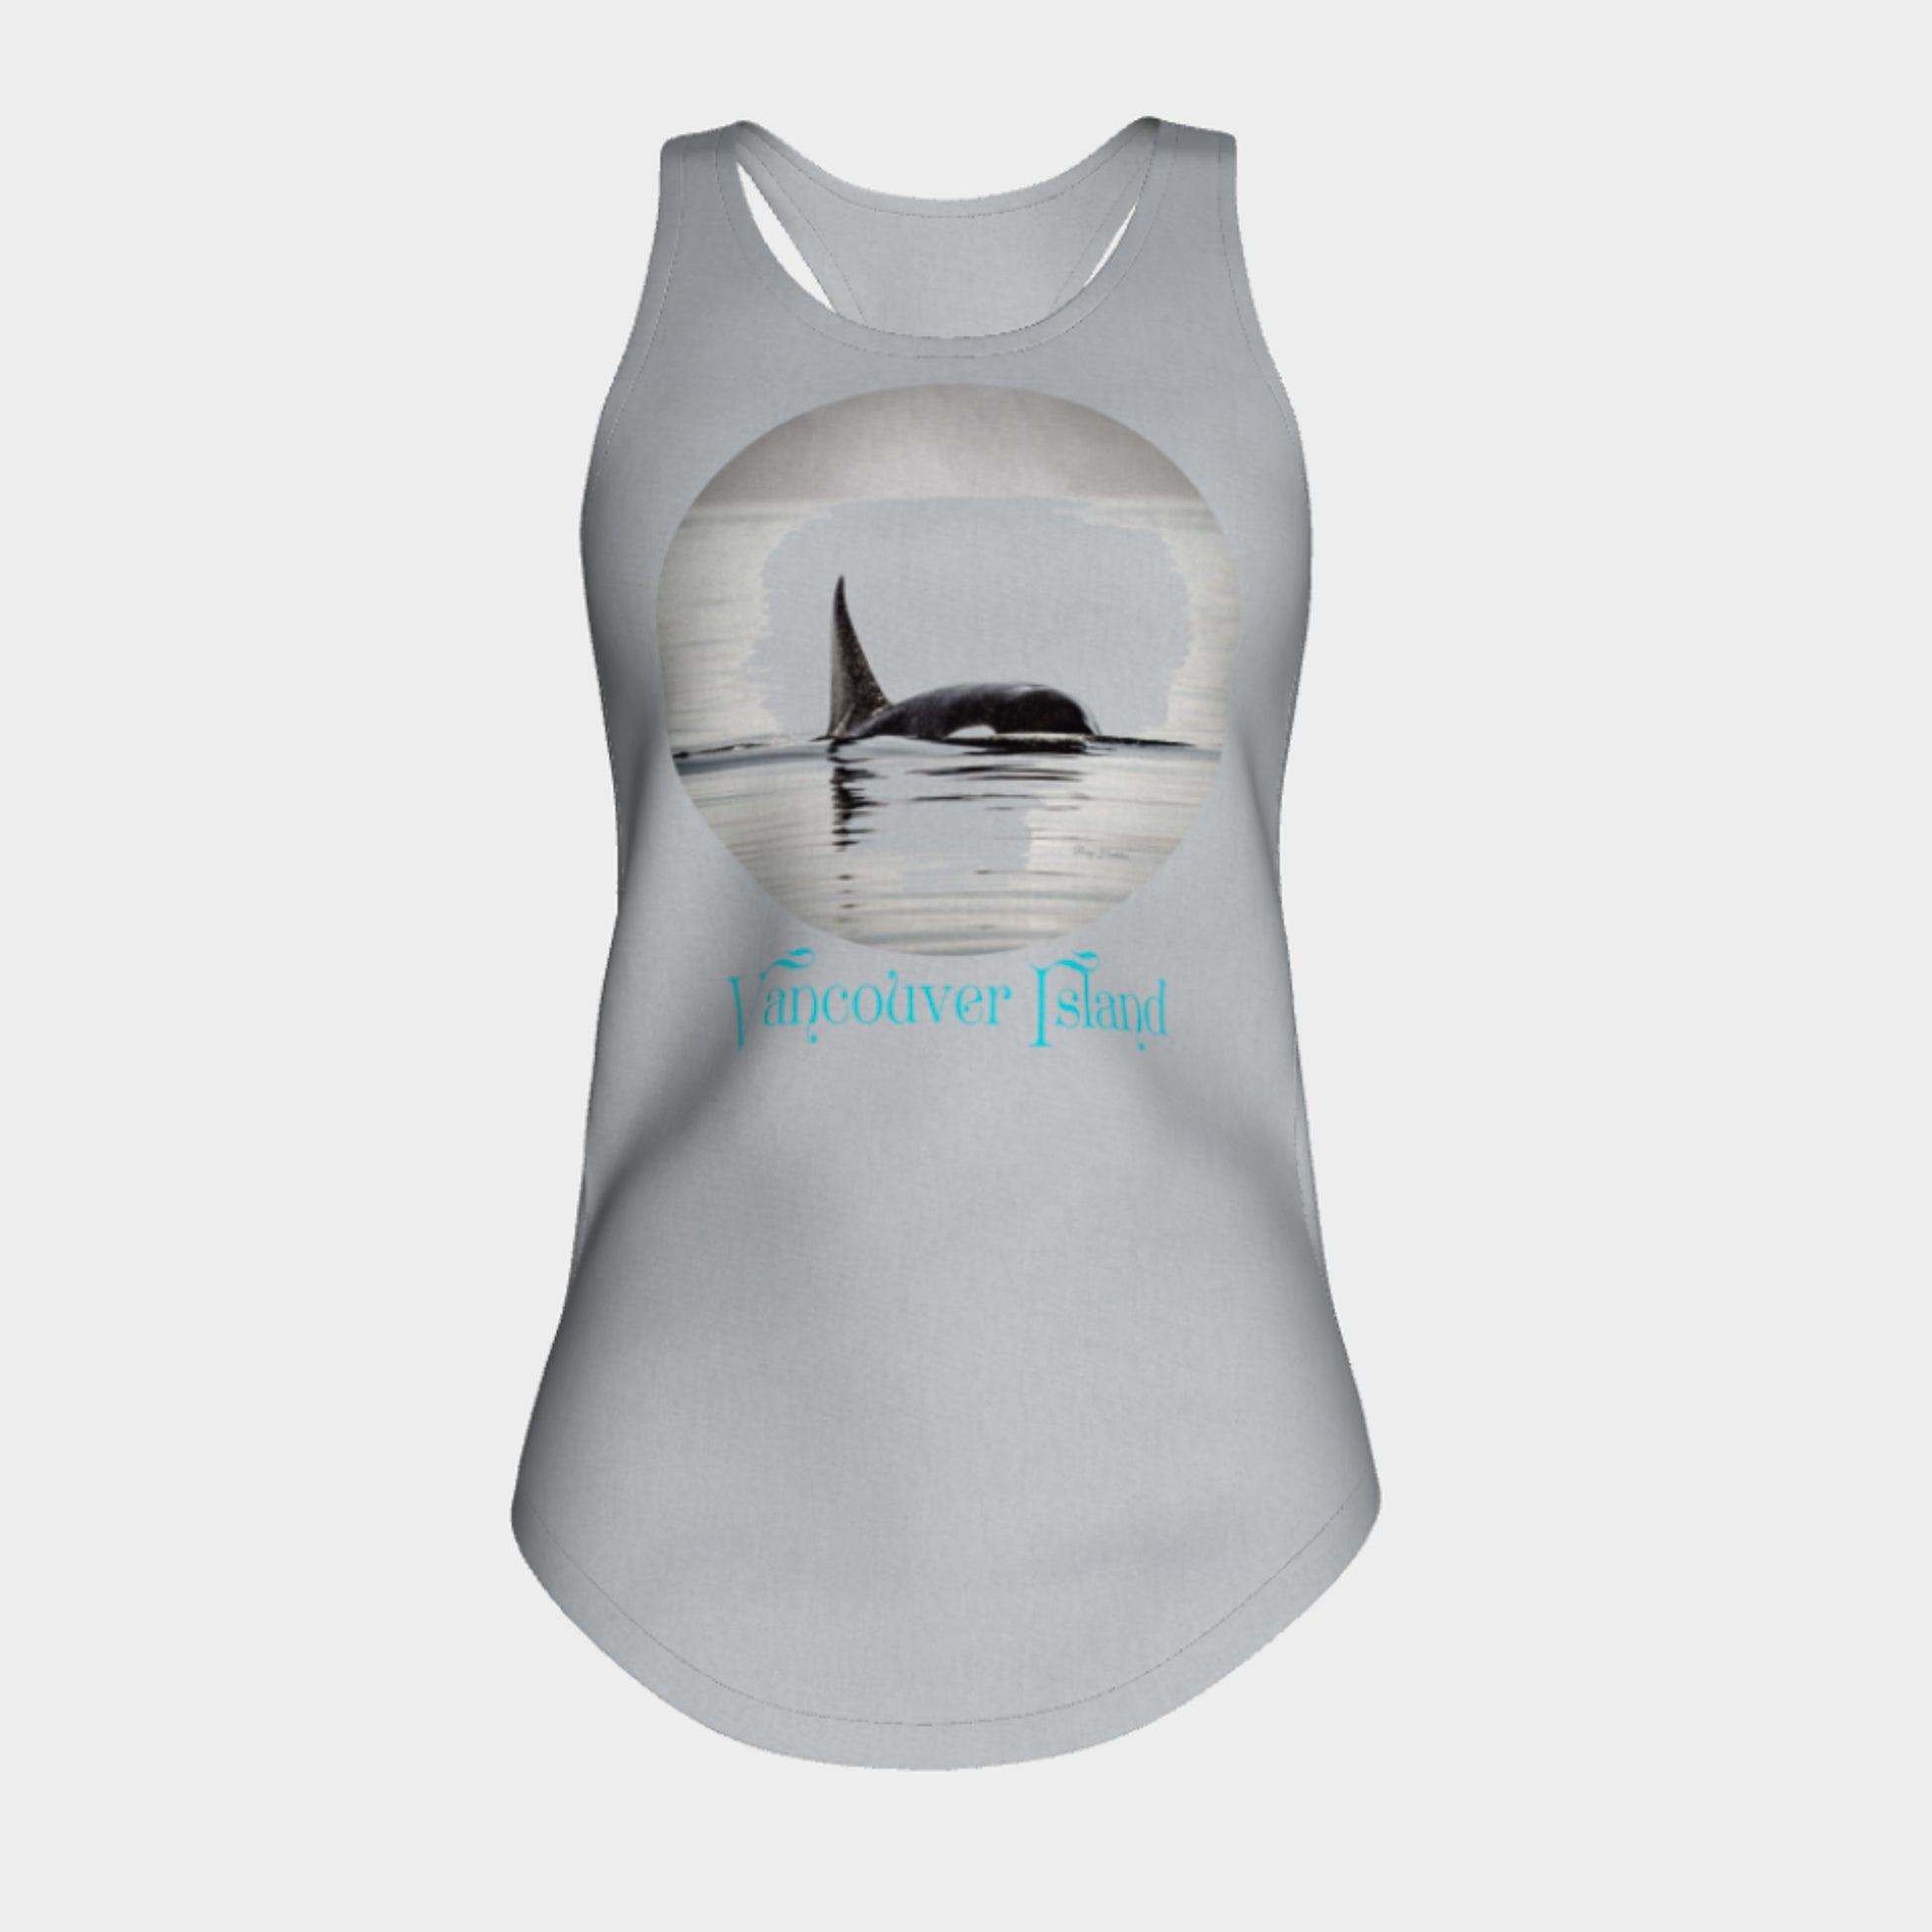 Orca Spray Vancouver Island Racerback Tank Top  Excellent choice for the summer or for working out.   Made from 60% spun cotton and 40% poly for a mix of comfort and performance, you get it all (including my photography and digital art) with this custom printed racerback tank top. 